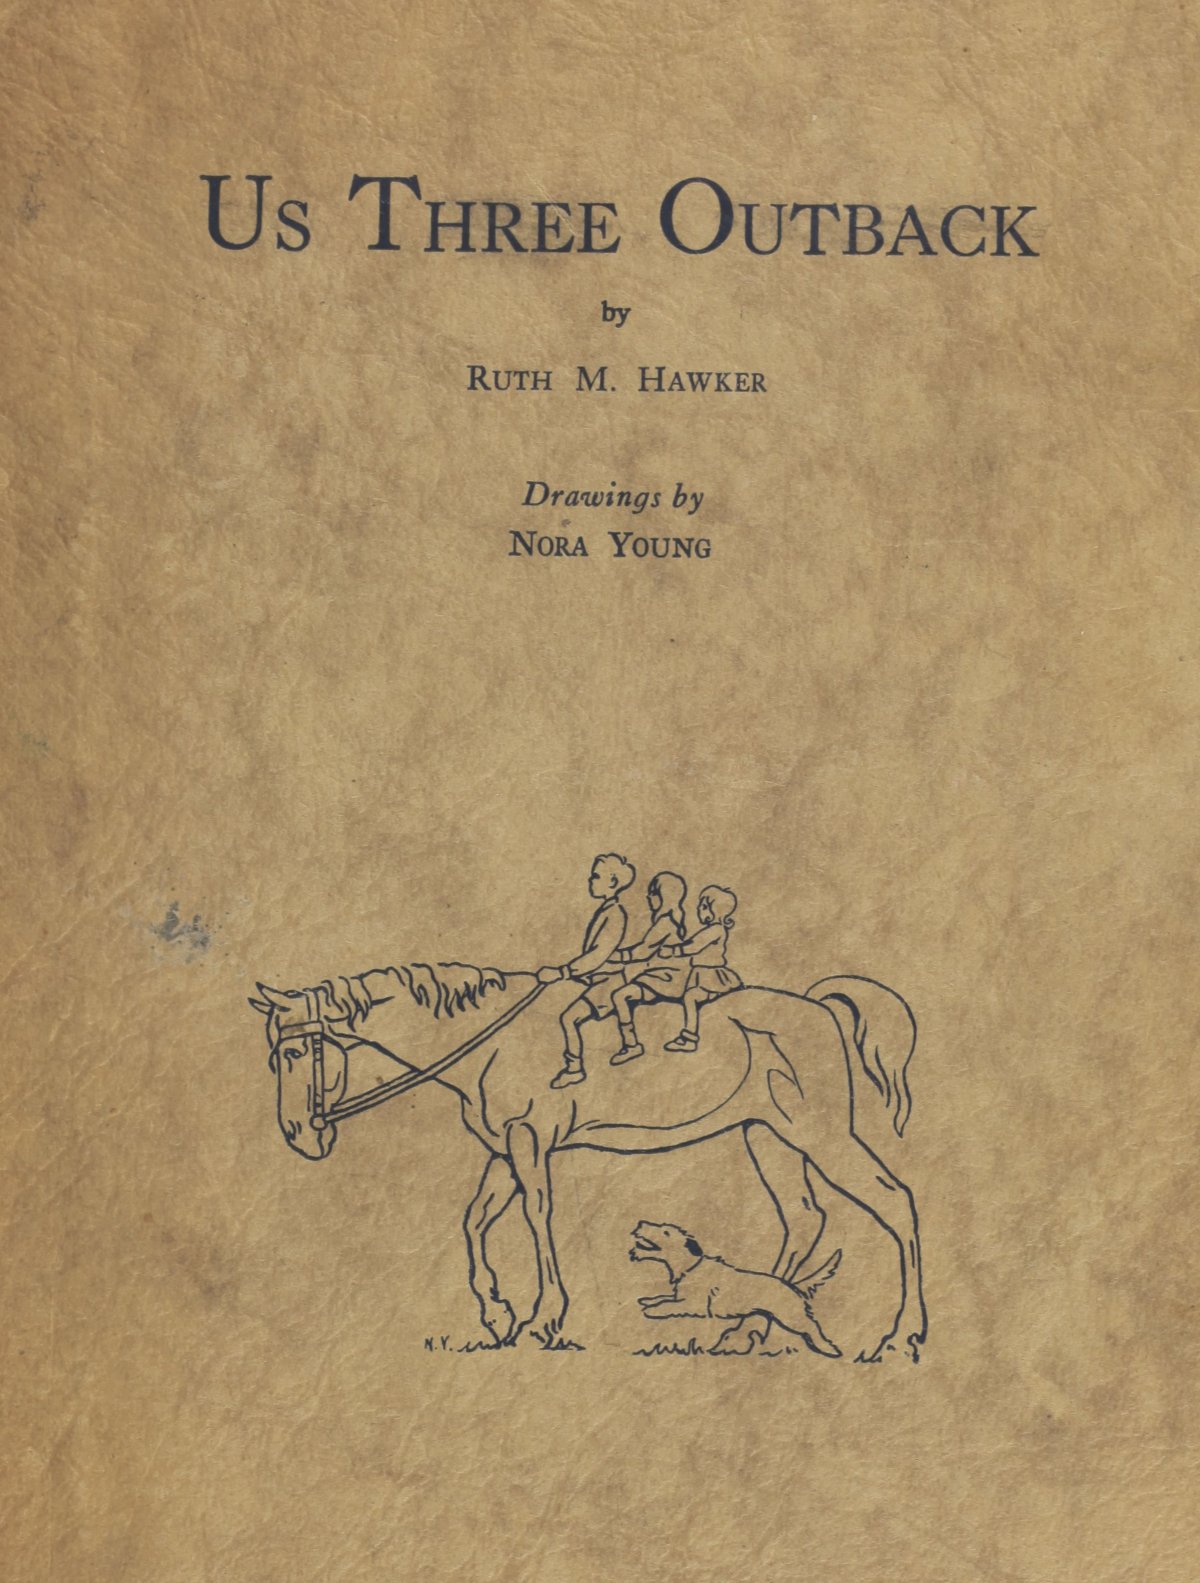 Image of cover for book Us Three Outback